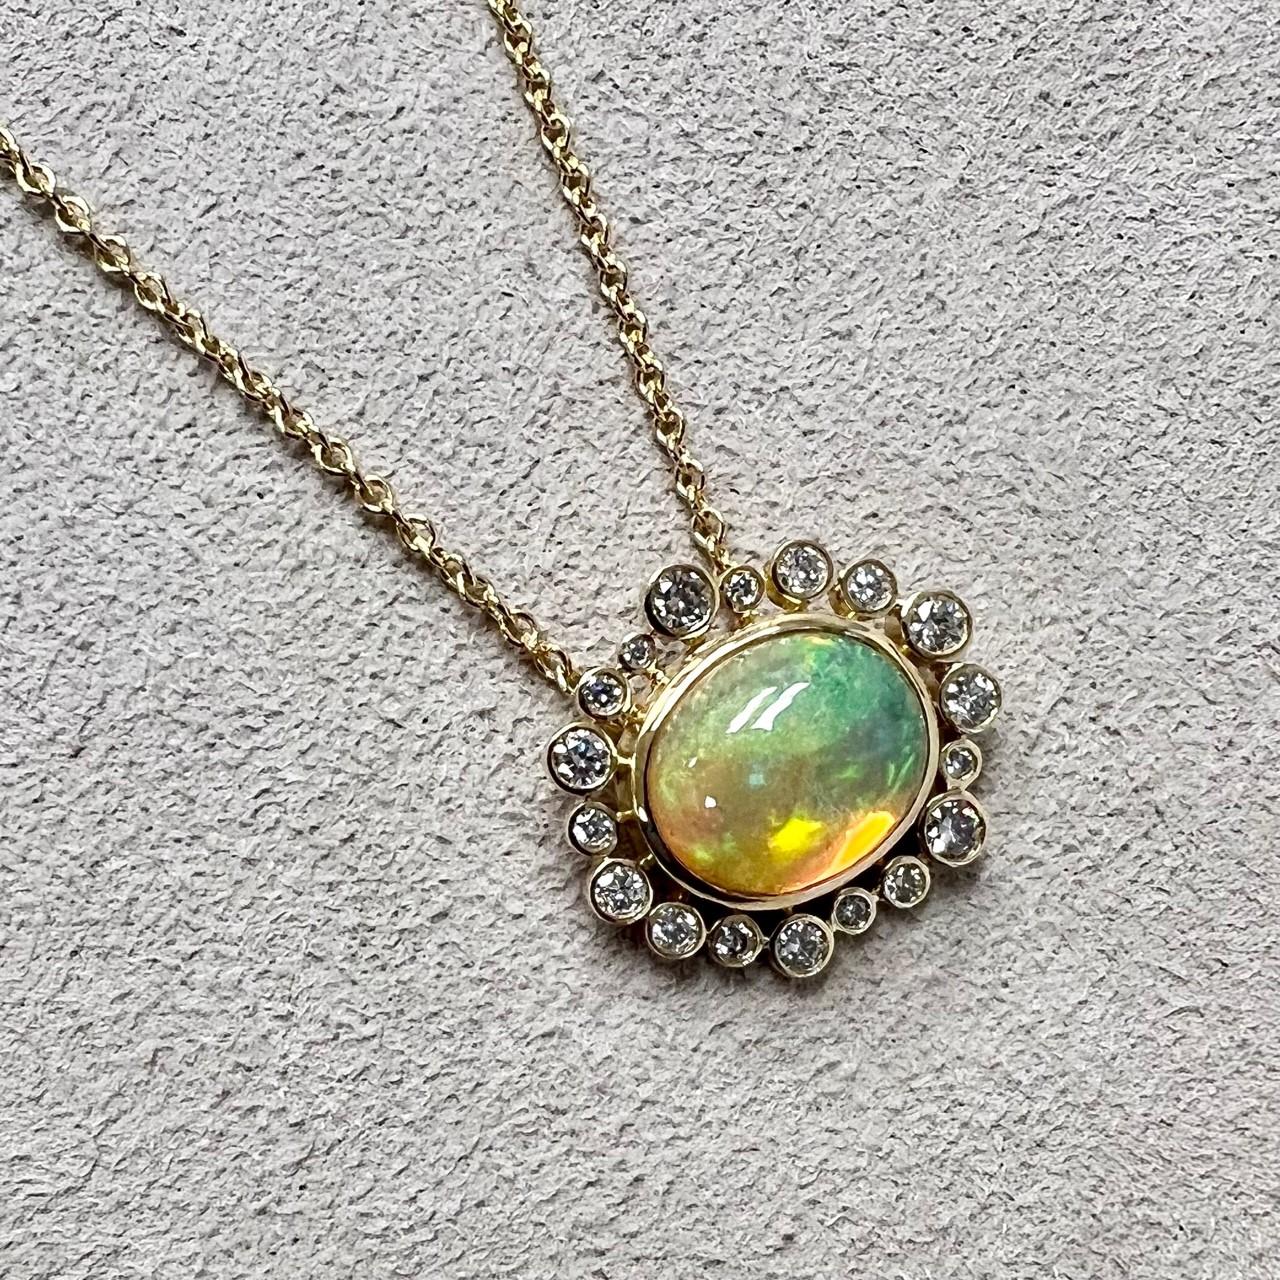 Created in 18 karat yellow gold
Ethiopian opal 2.80 carats approx.
Diamonds 0.40 carat approx.
18 inch chain with loops at 16th and 17th inch
Lobster lock

A treat for your neck, this 18 karat yellow gold necklace showcases a stunning Ethiopian